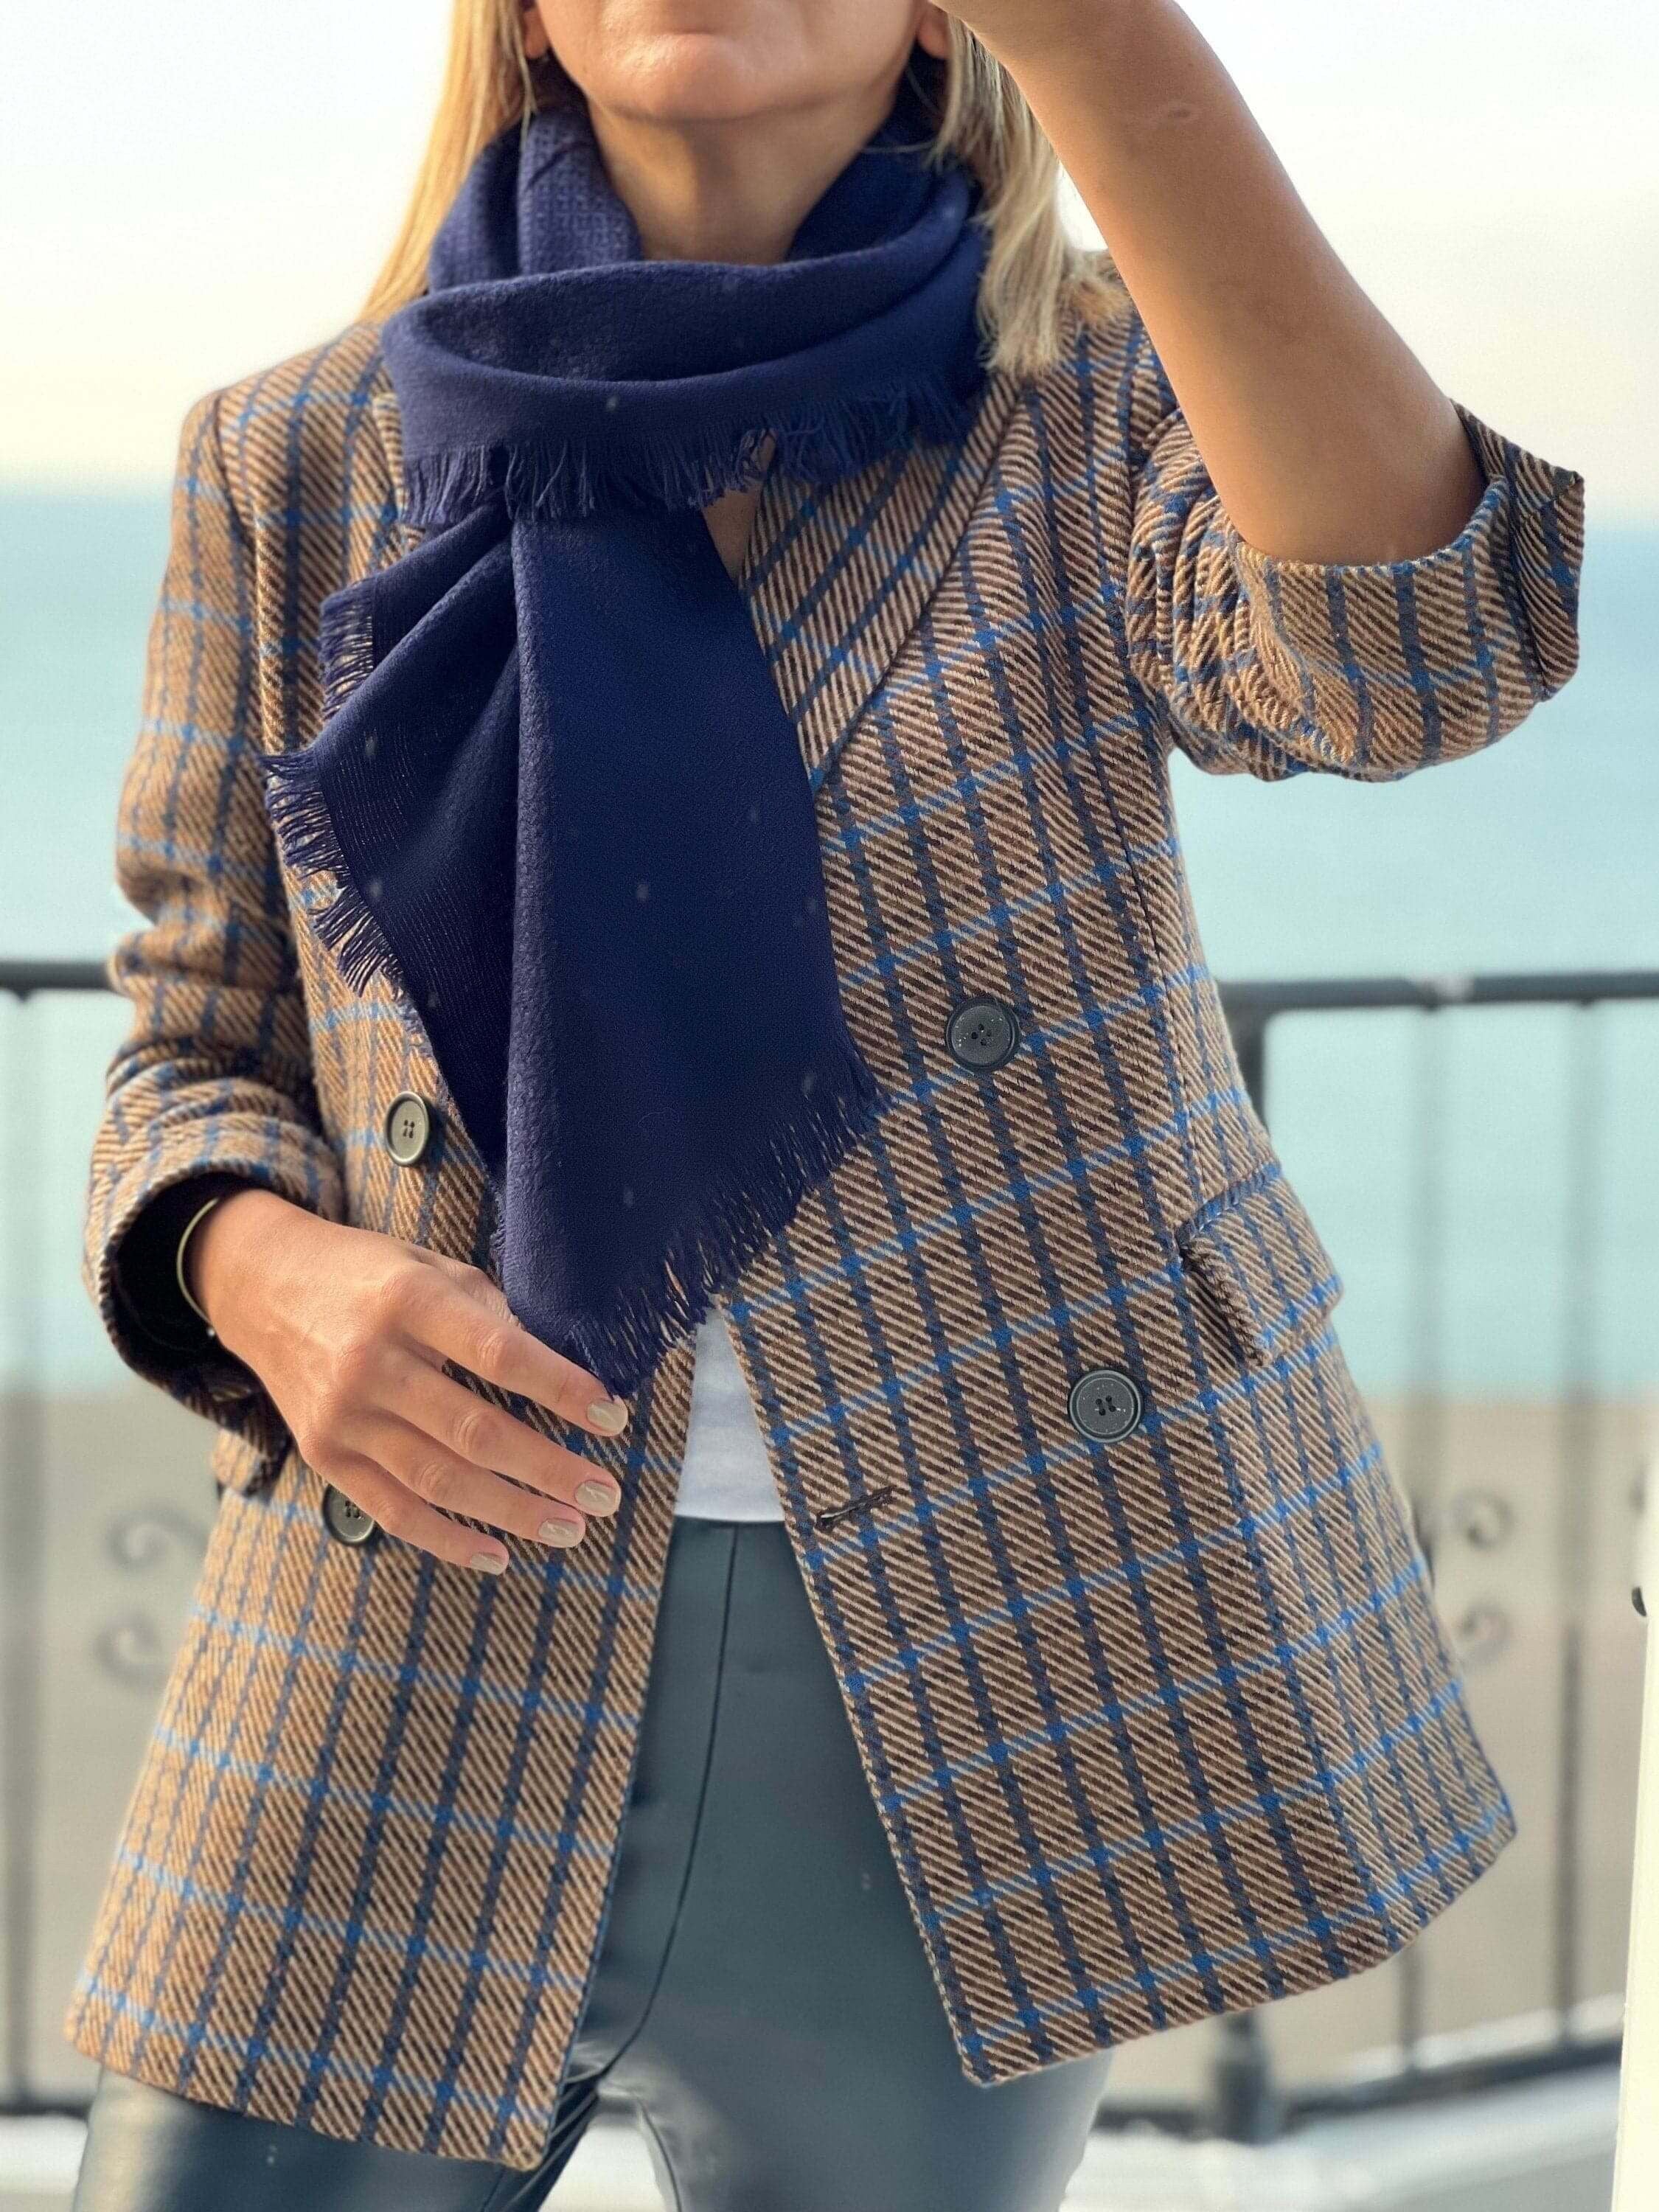 Add a pop of color to your winter wardrobe with this navy blue cotton wool blend scarf. A great gift for her, this solid scarf is soft and warm.